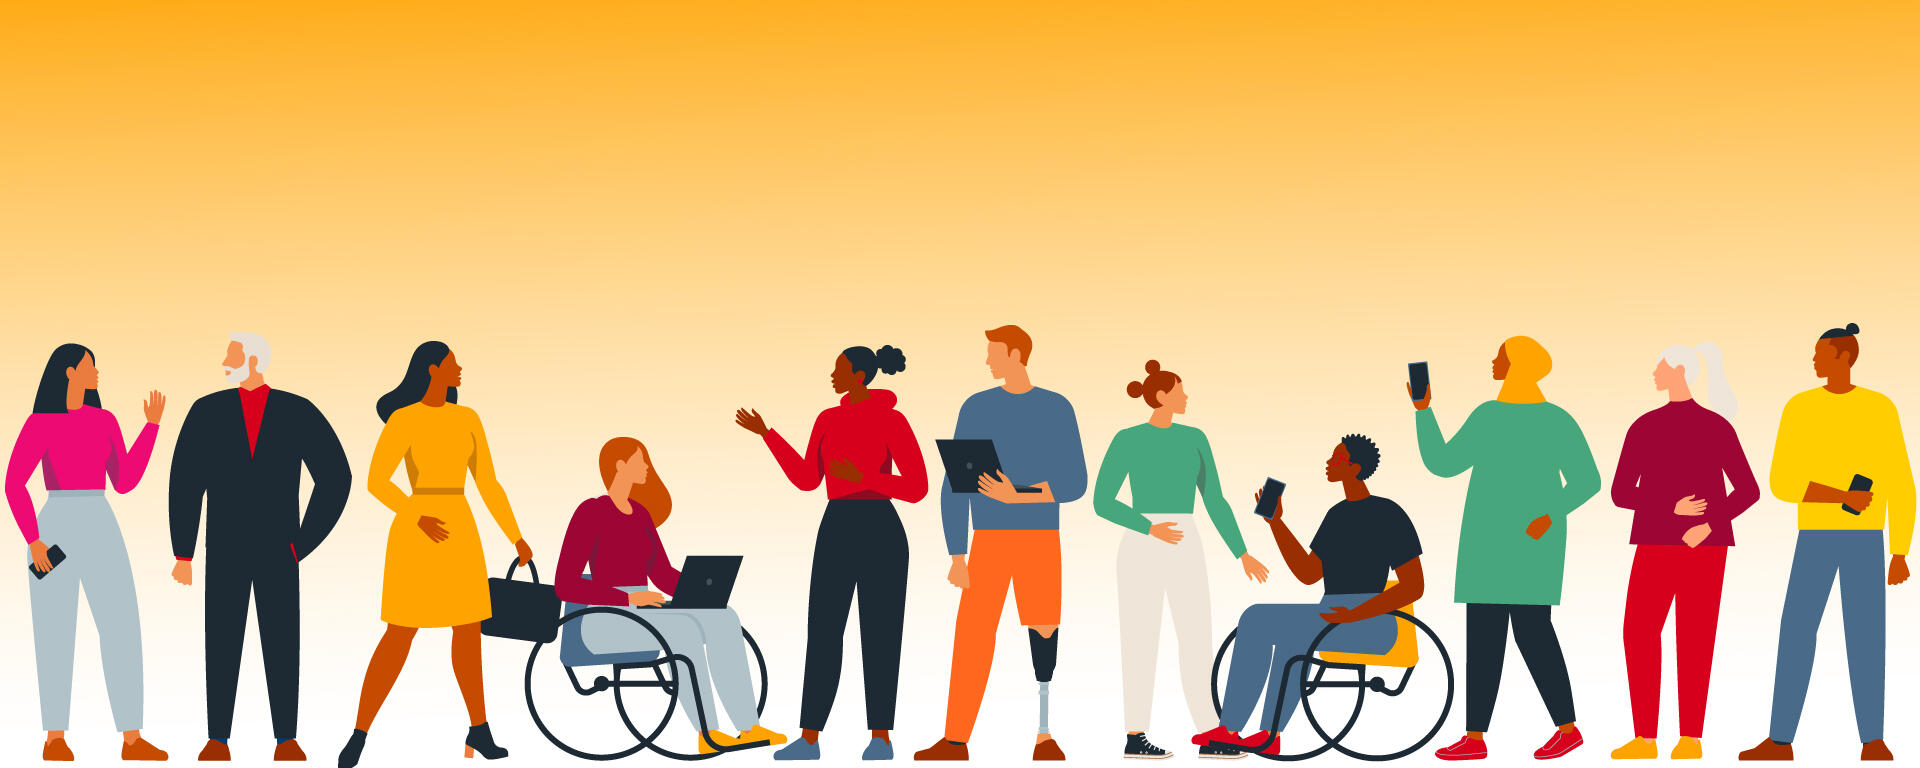 Illustration of a diverse group of people including someone in a wheelchair, an amputee, a woman wearing a hijab, and both men and women with various shades of skin colour, black, brown, and white.